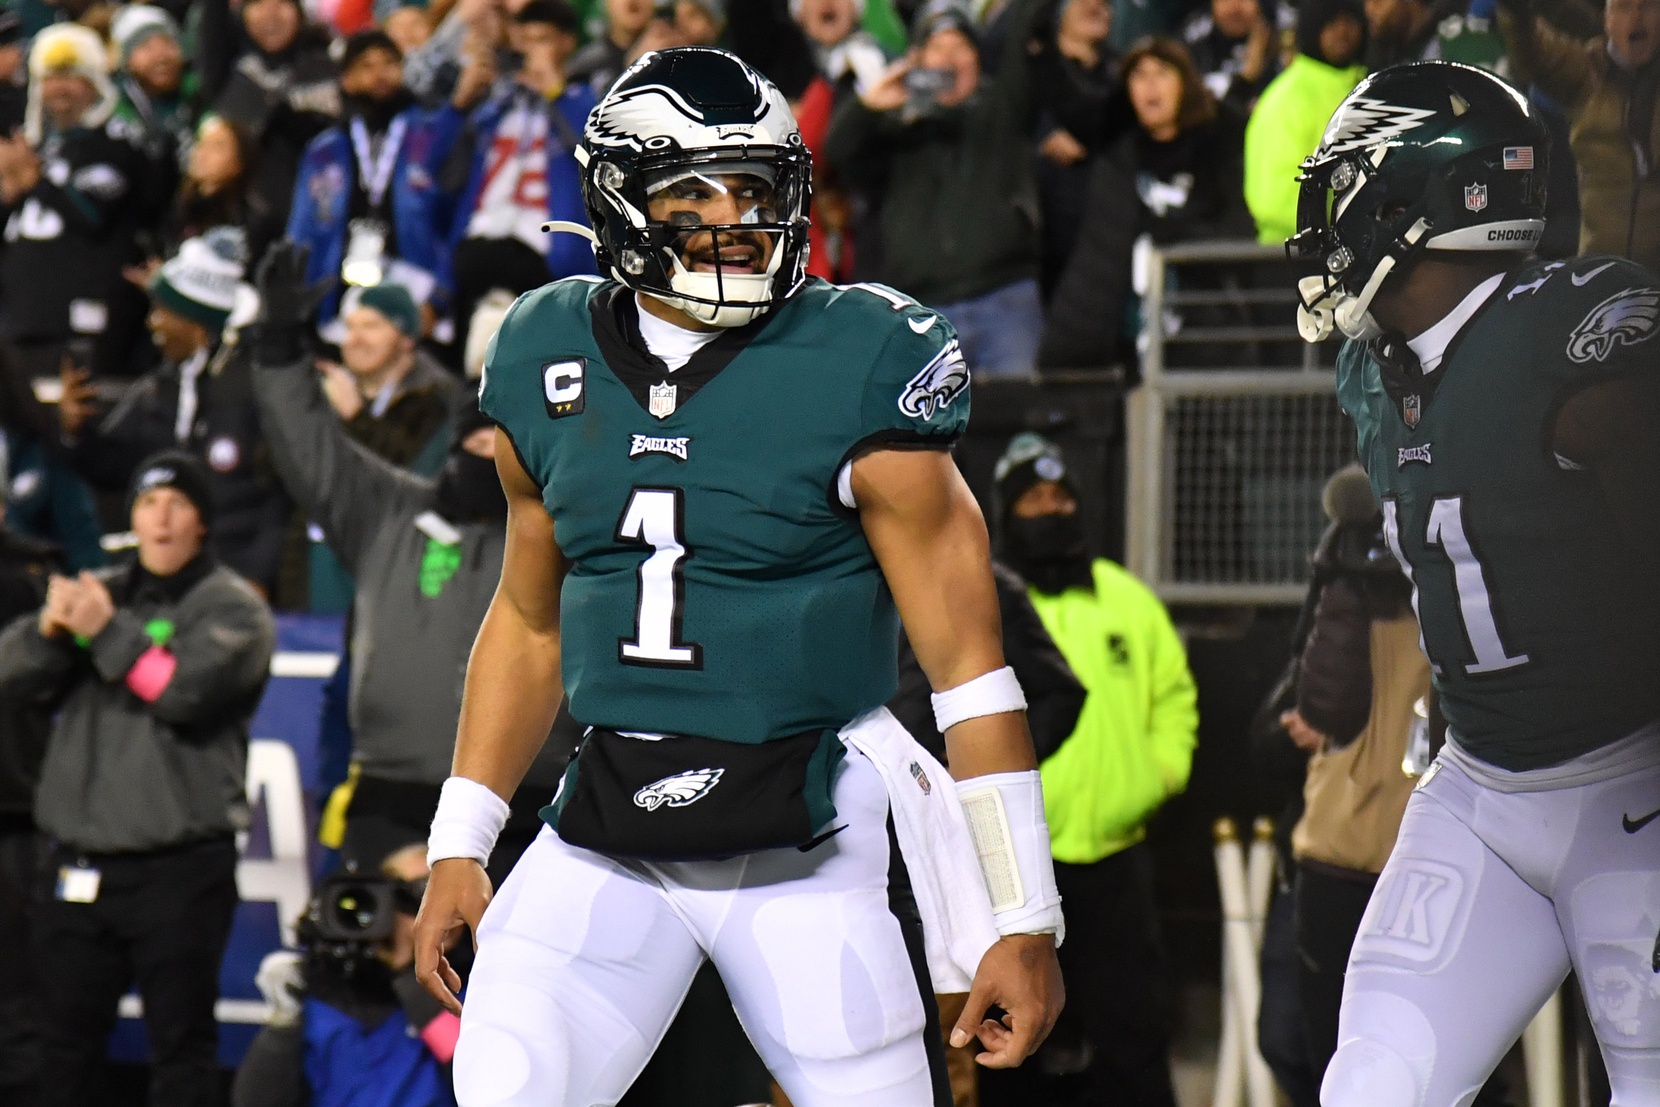 49ers-Eagles NFC championship ame odds, lines, spread and bet